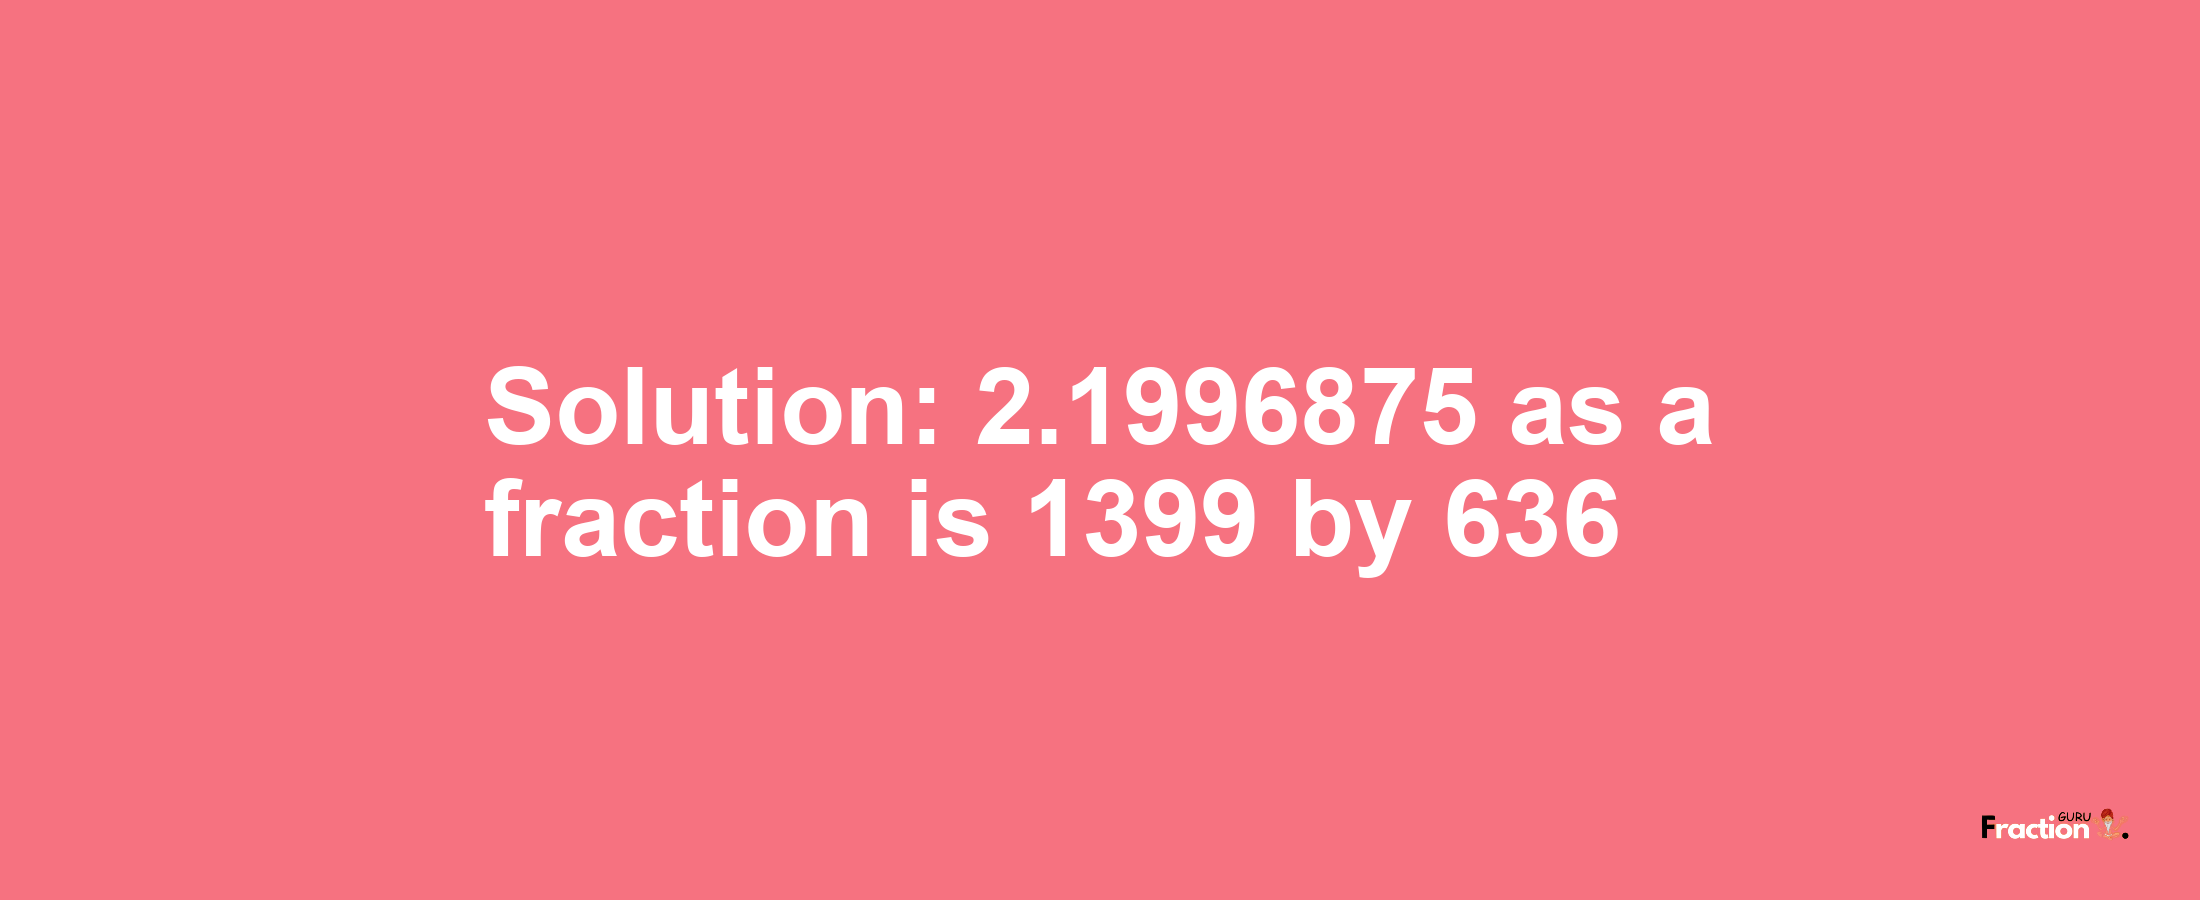 Solution:2.1996875 as a fraction is 1399/636